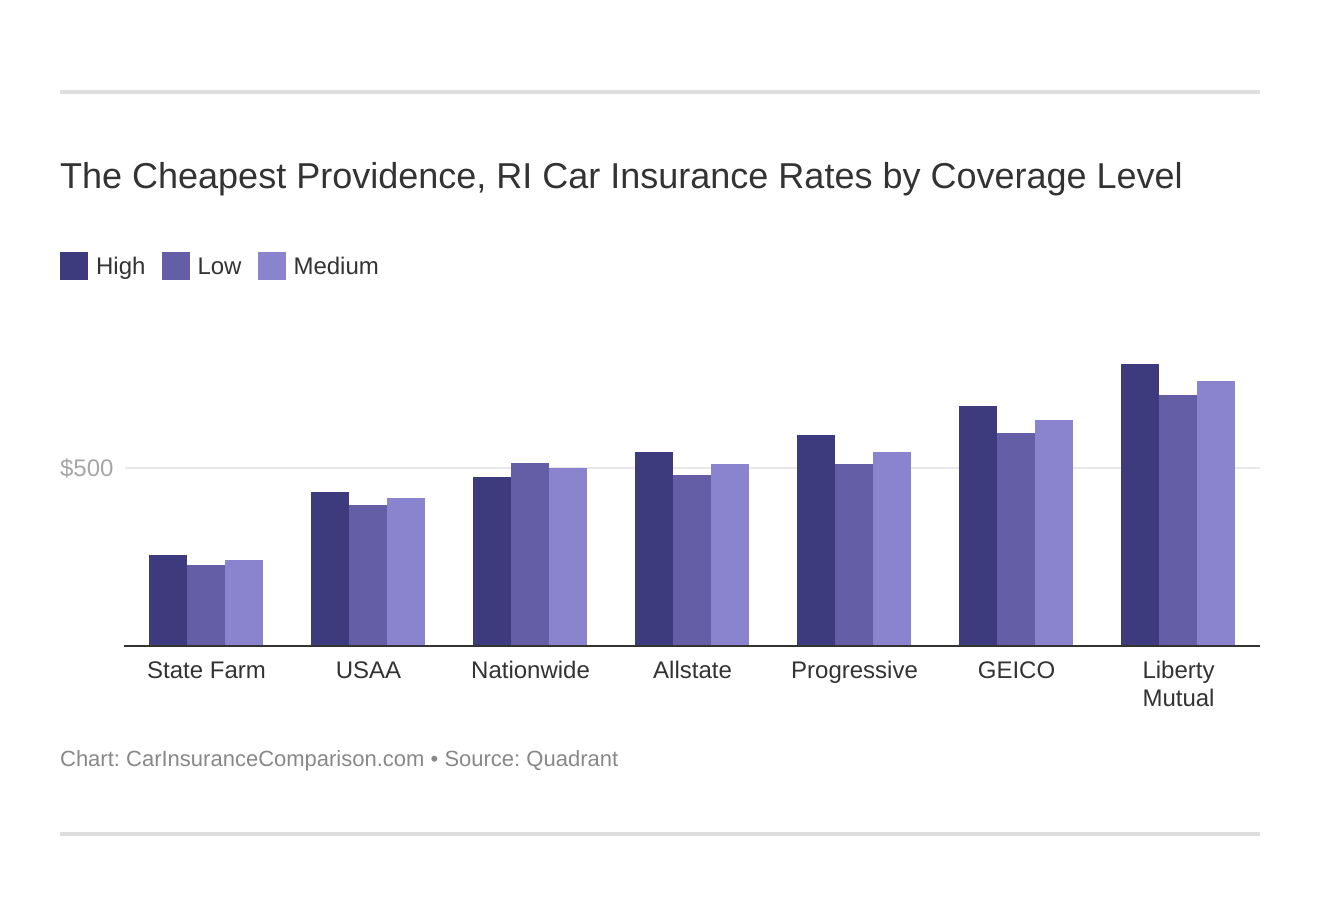 The Cheapest Providence, RI Car Insurance Rates by Coverage Level